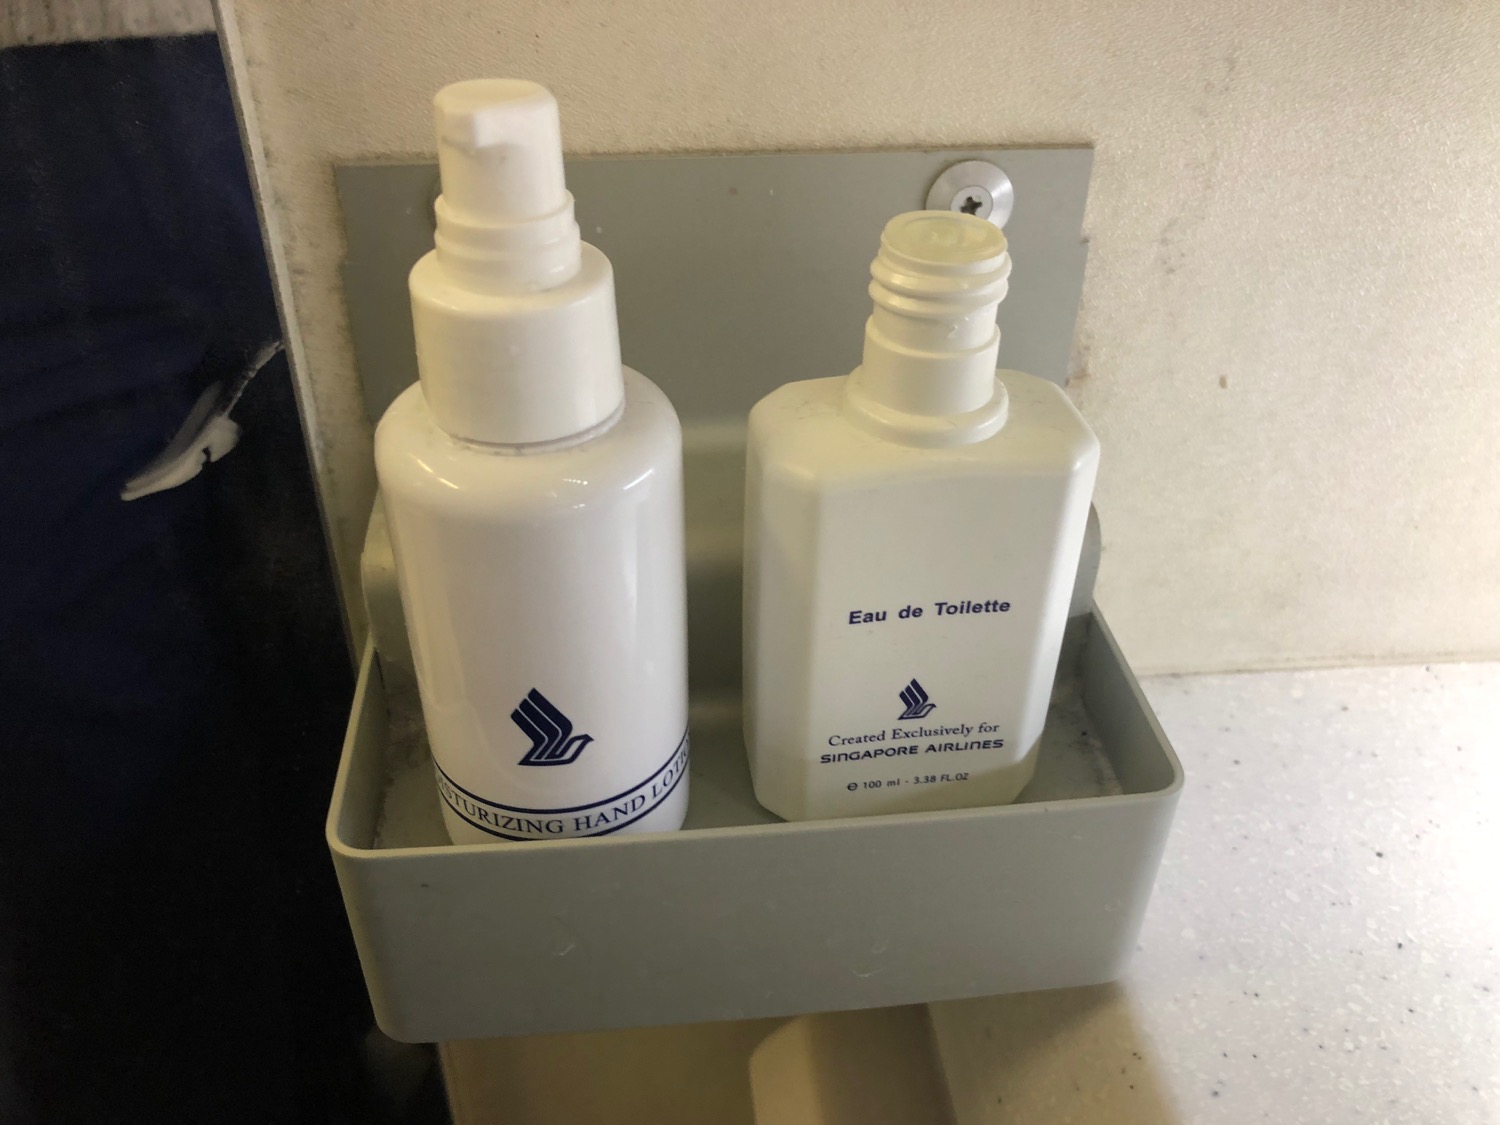 a couple of white bottles in a holder